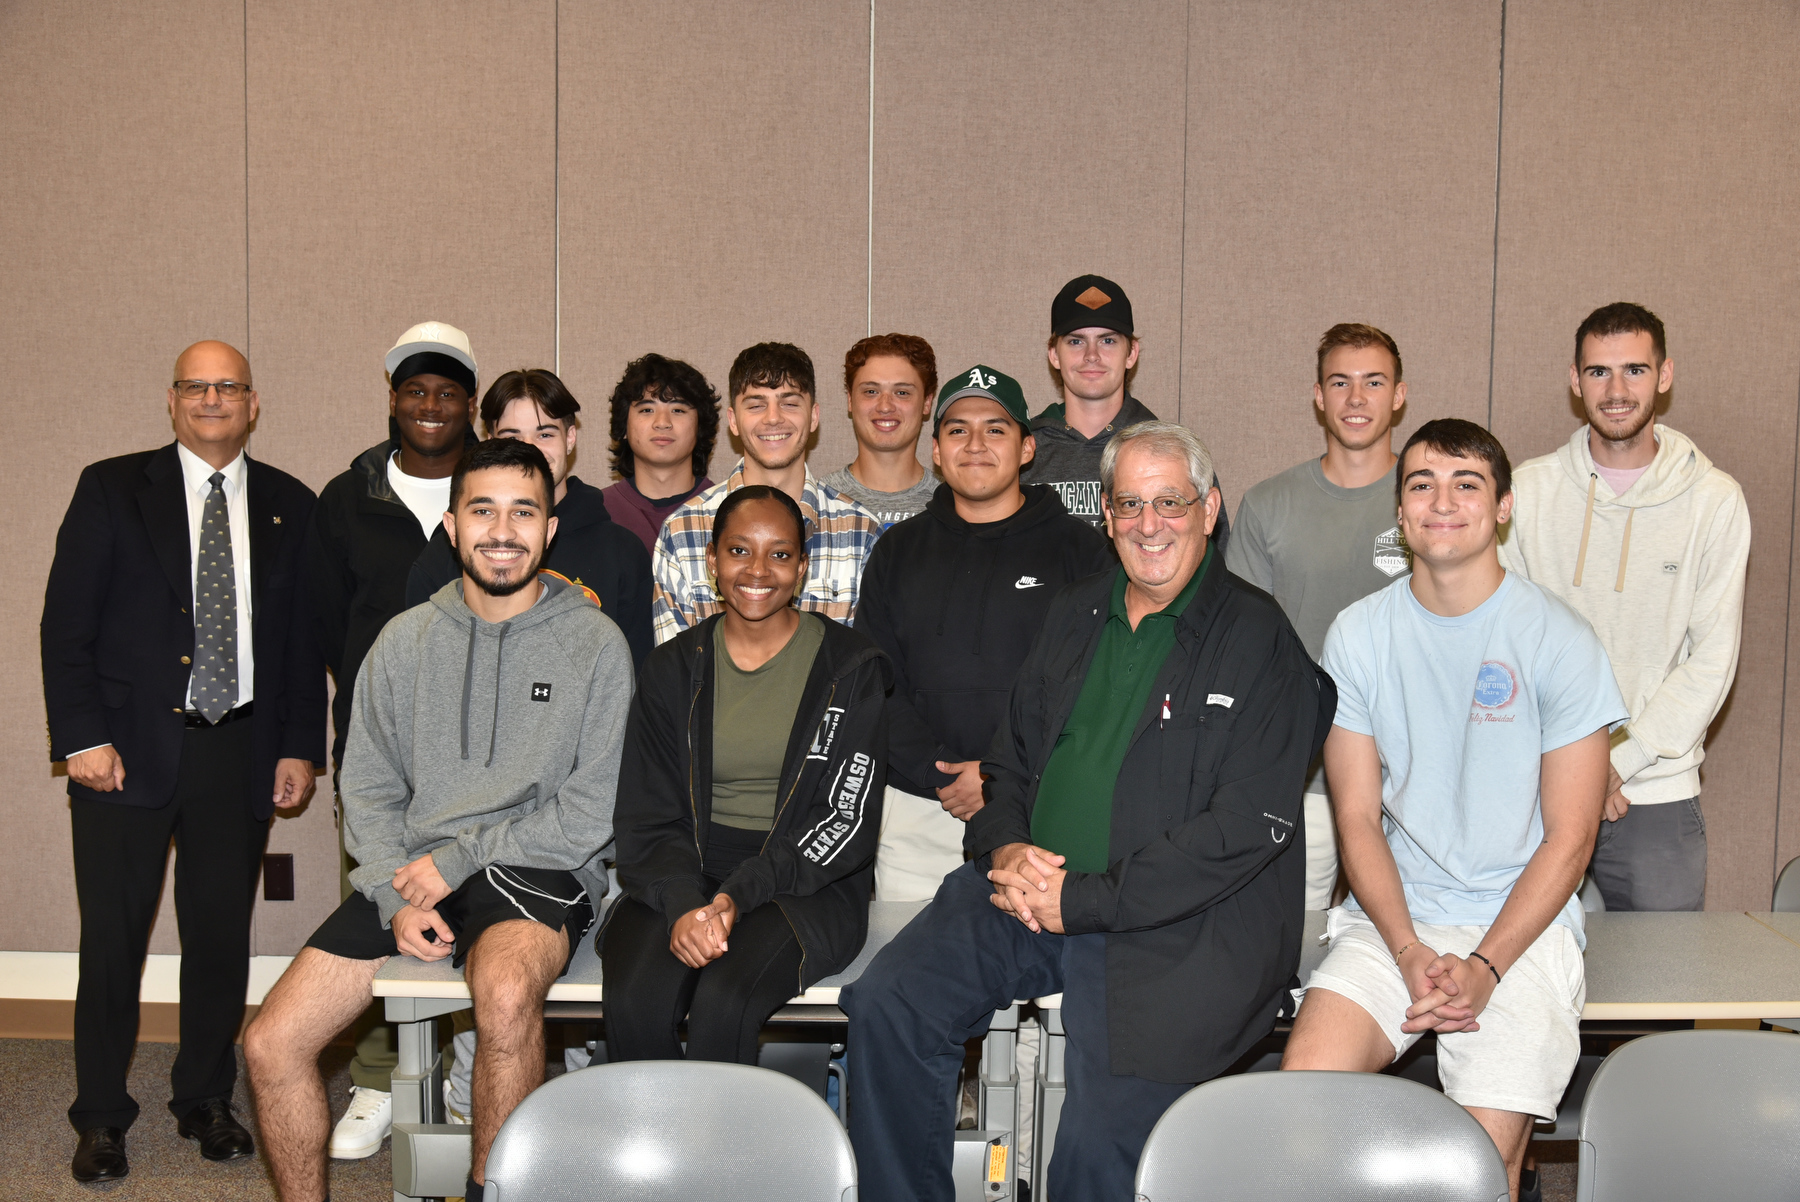 Bill Spinnelli (foreground), a class ‘84 alumnus, pauses for a photo with students in Graig Arcuri's (back left) “Real Estate Finance” class. The president and owner of Titan Homes, Spinnelli spoke during a recent class visit, part of the Alumni Sharing Knowledge program (ASK). 